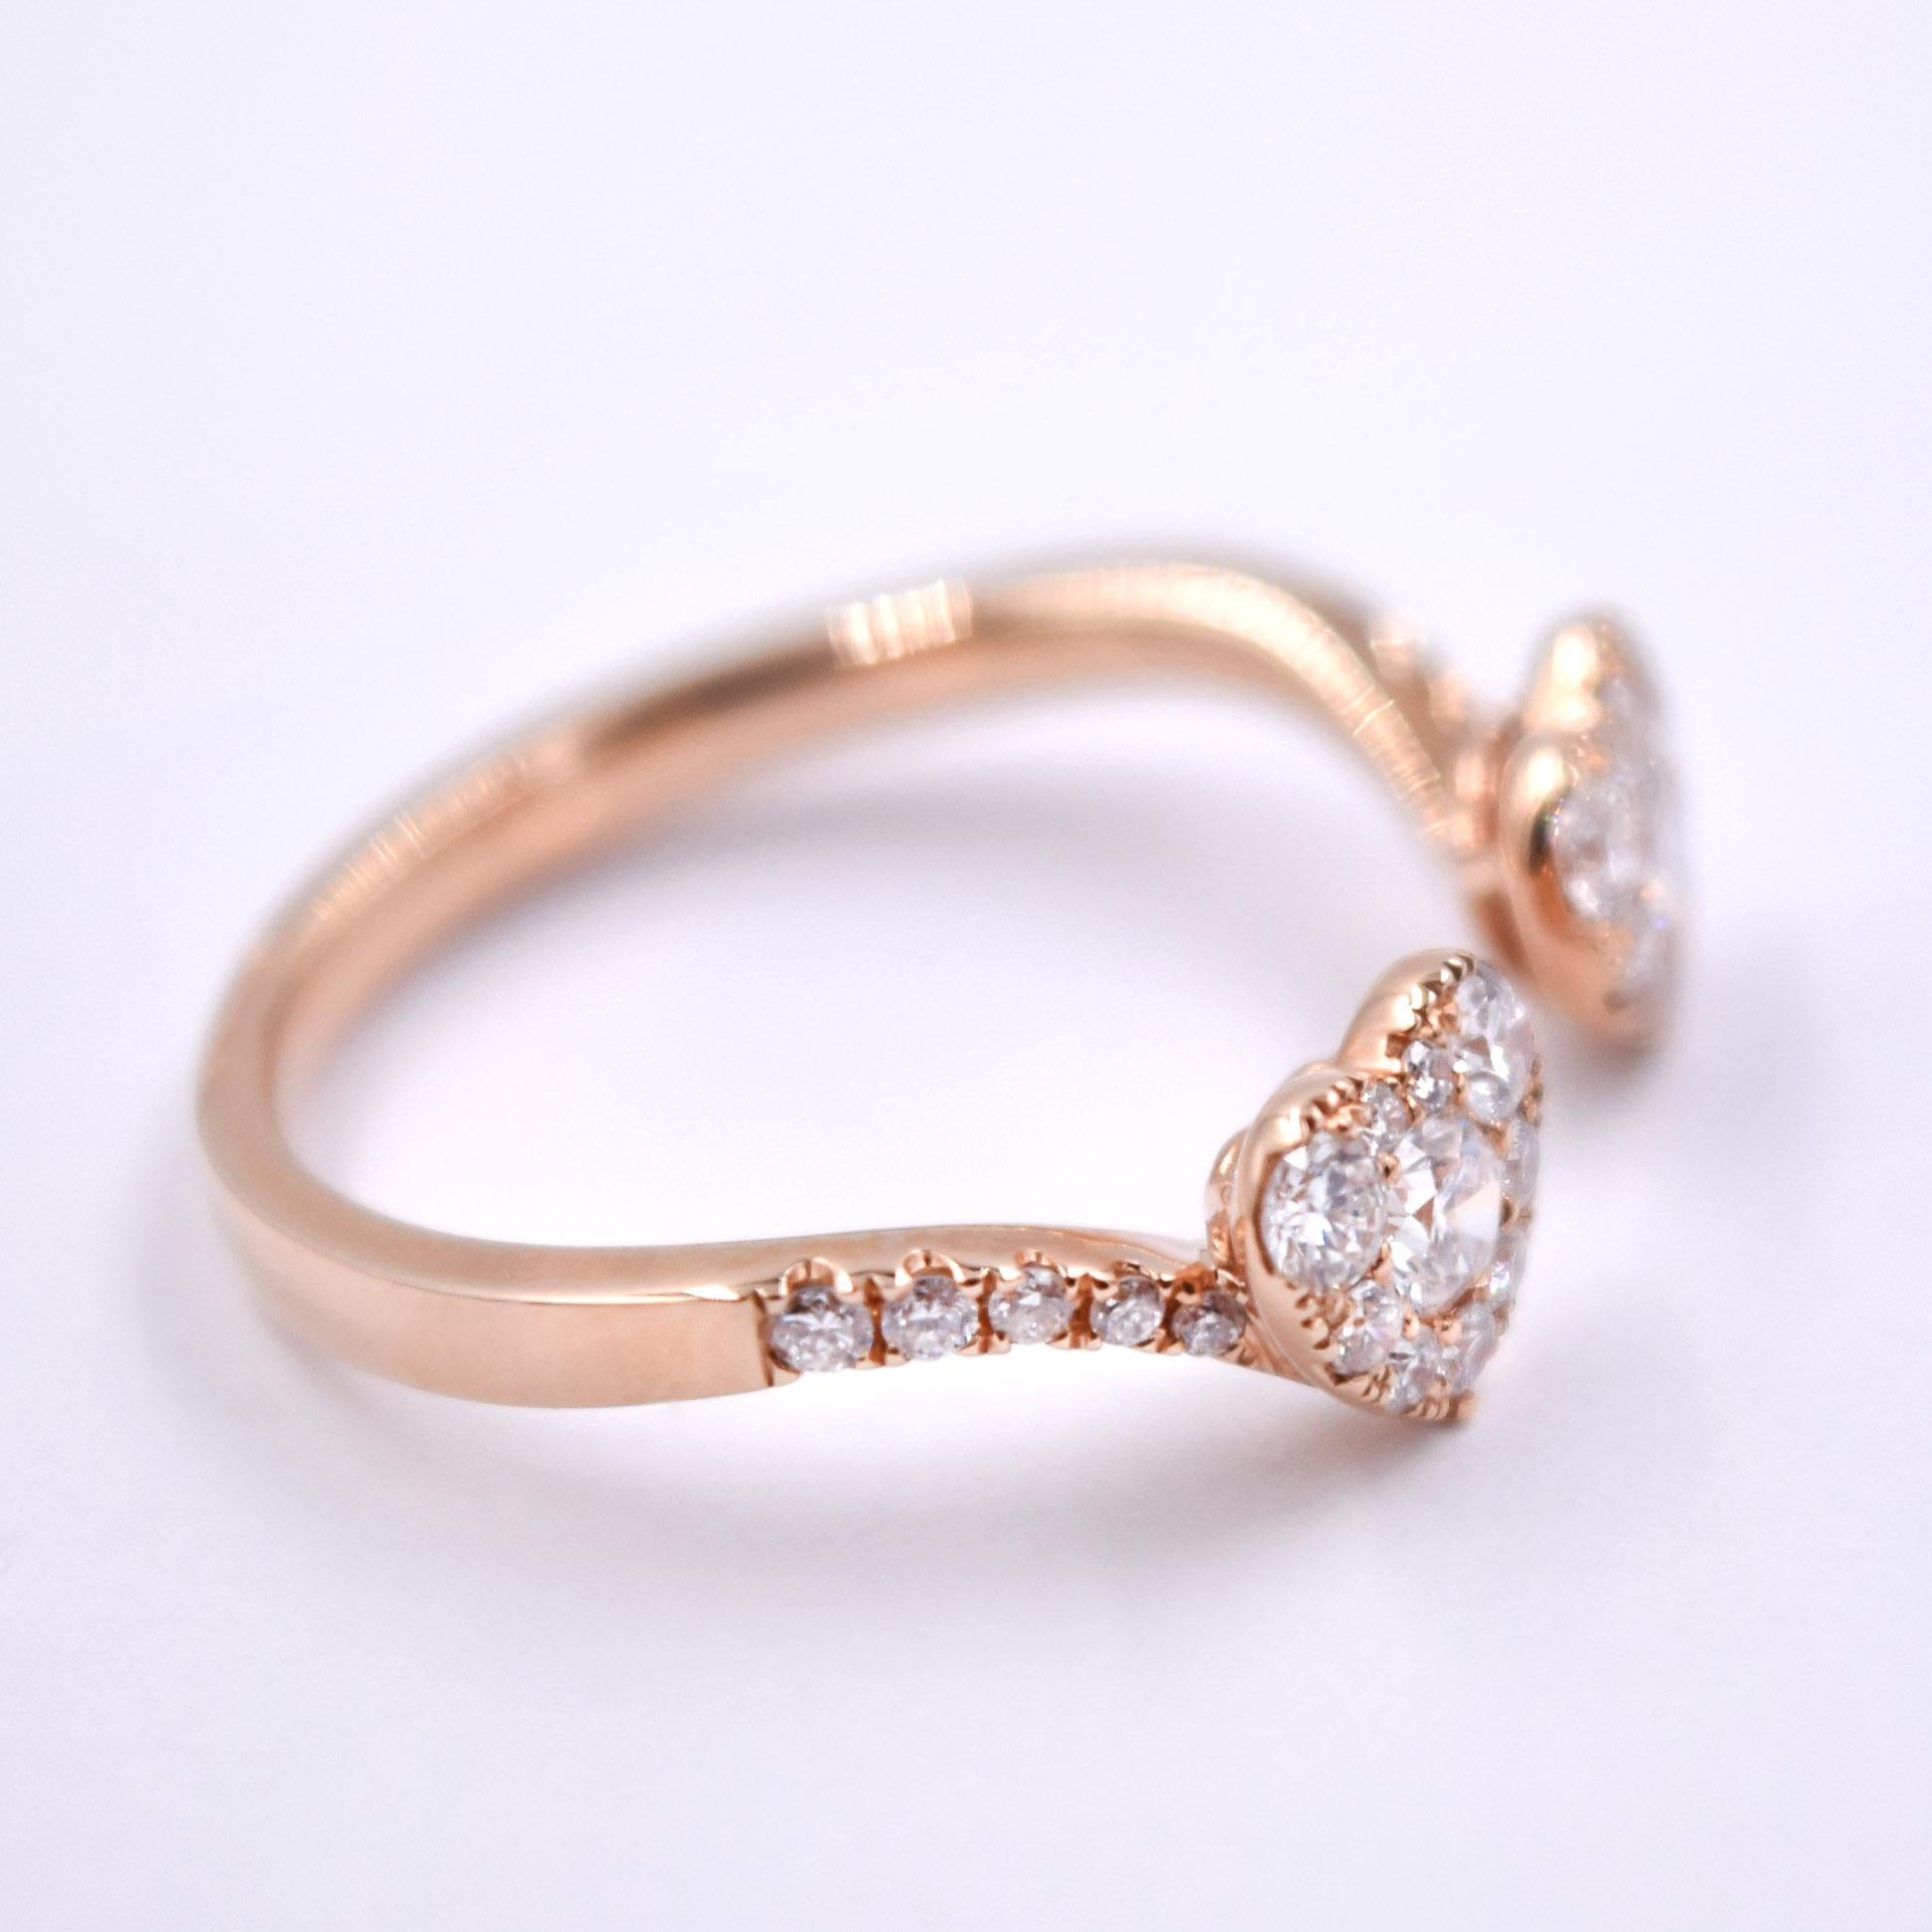 0.49 Carat Heart Cluster Diamond Promise Ring in 18 Karat Rose Gold In New Condition For Sale In Mill Valley, CA